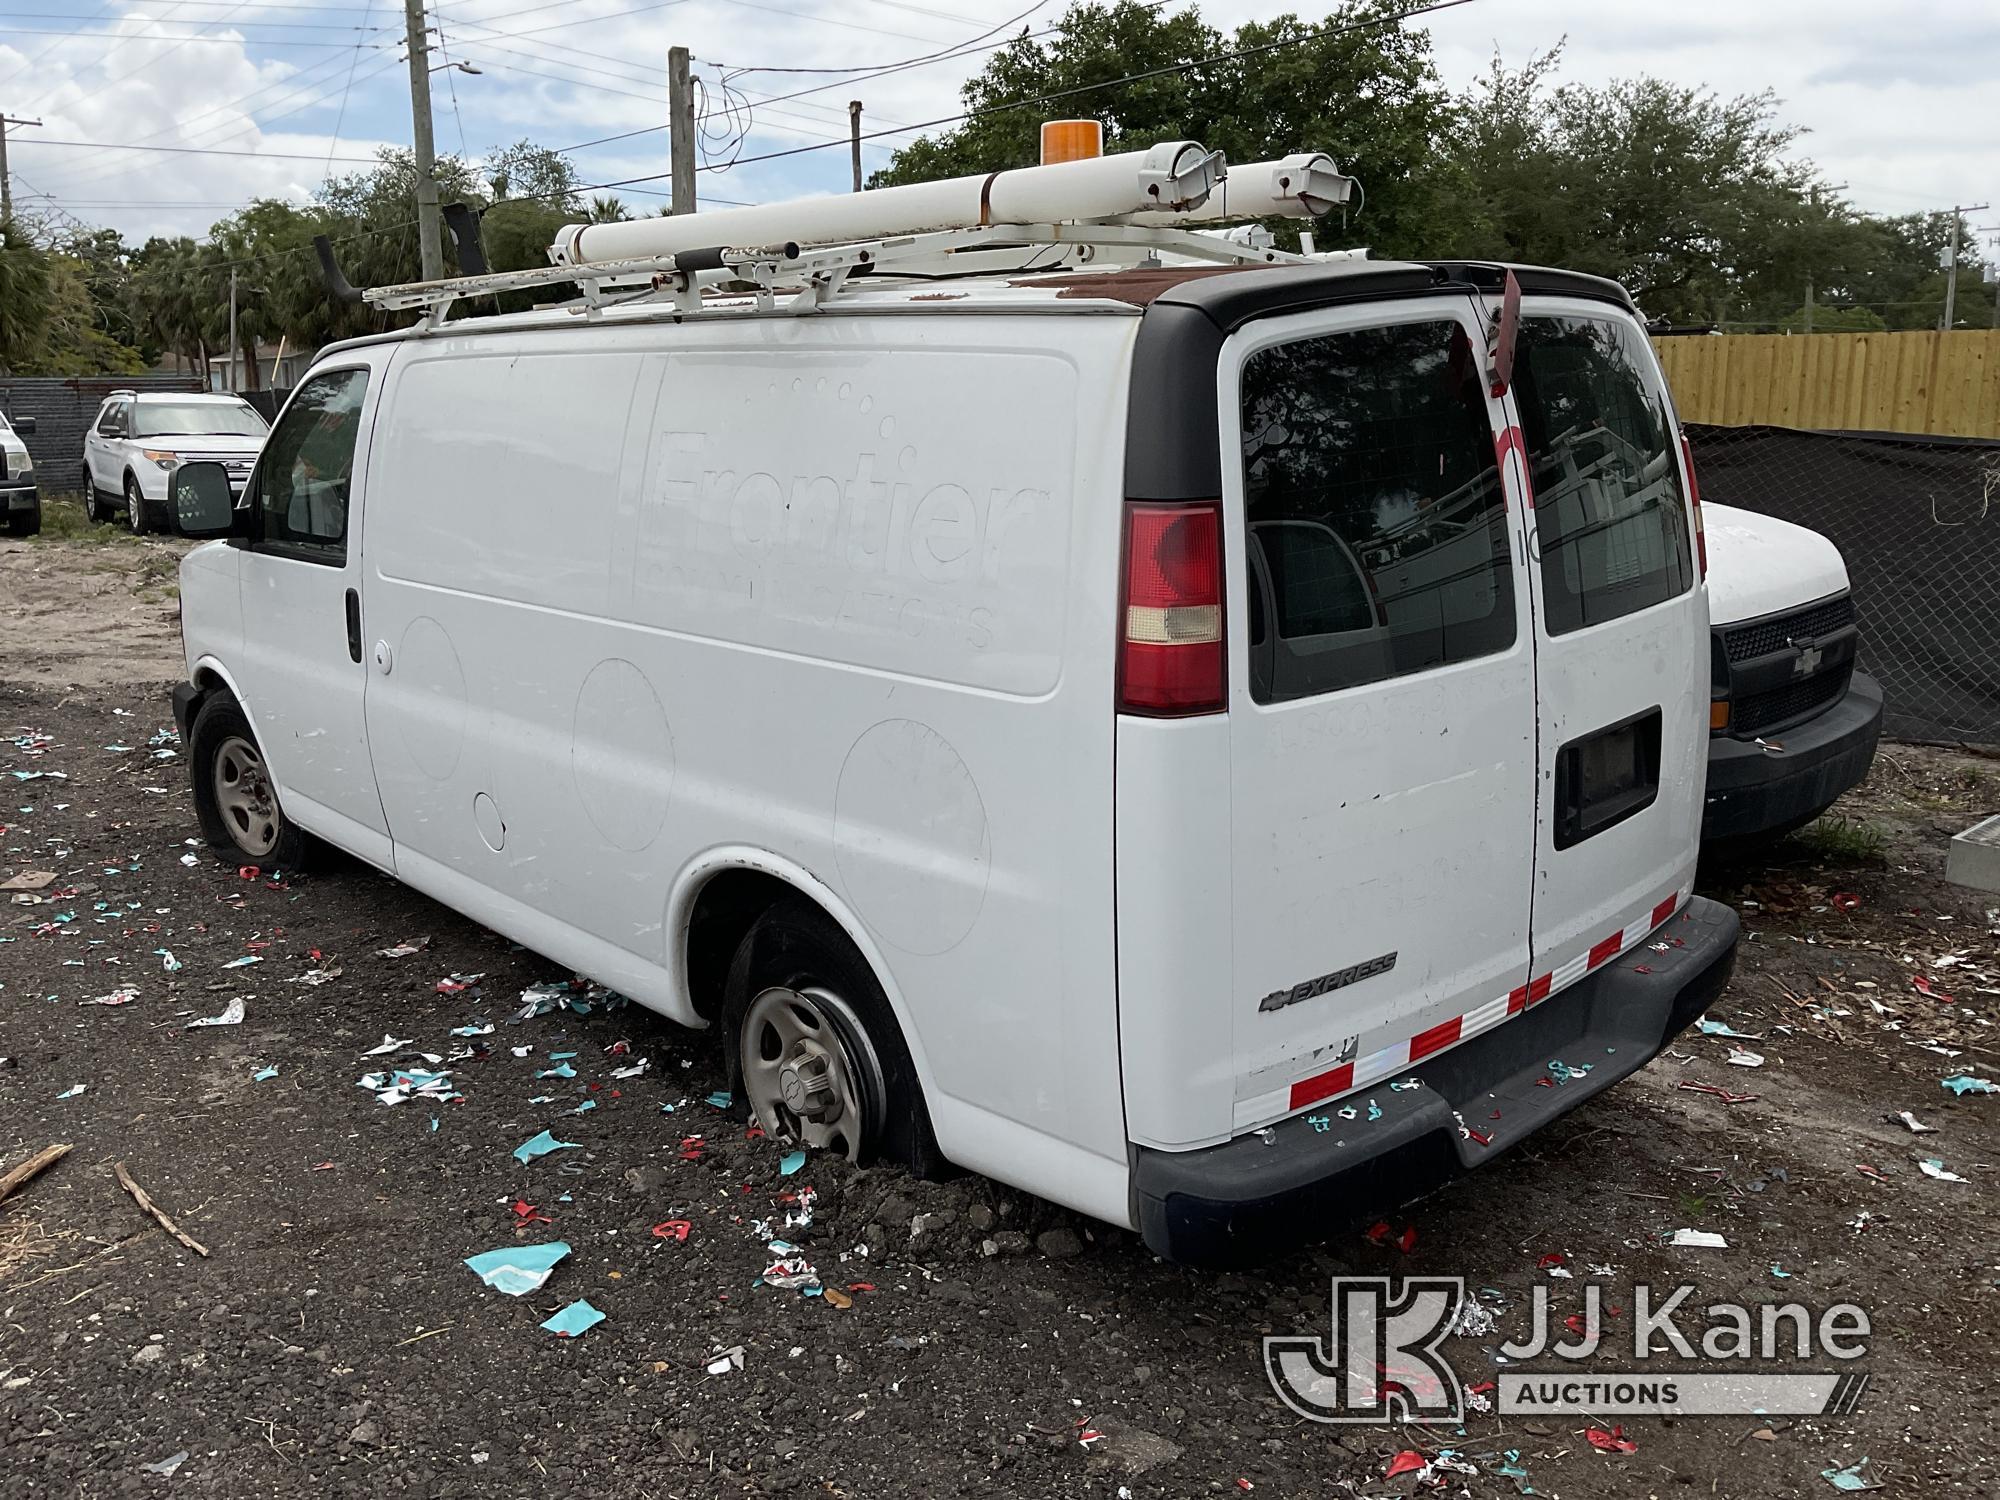 (Tampa, FL) 2007 Chevrolet Express G1500 Cargo Van Not Running & Condition Unknown) (Turn Over Will